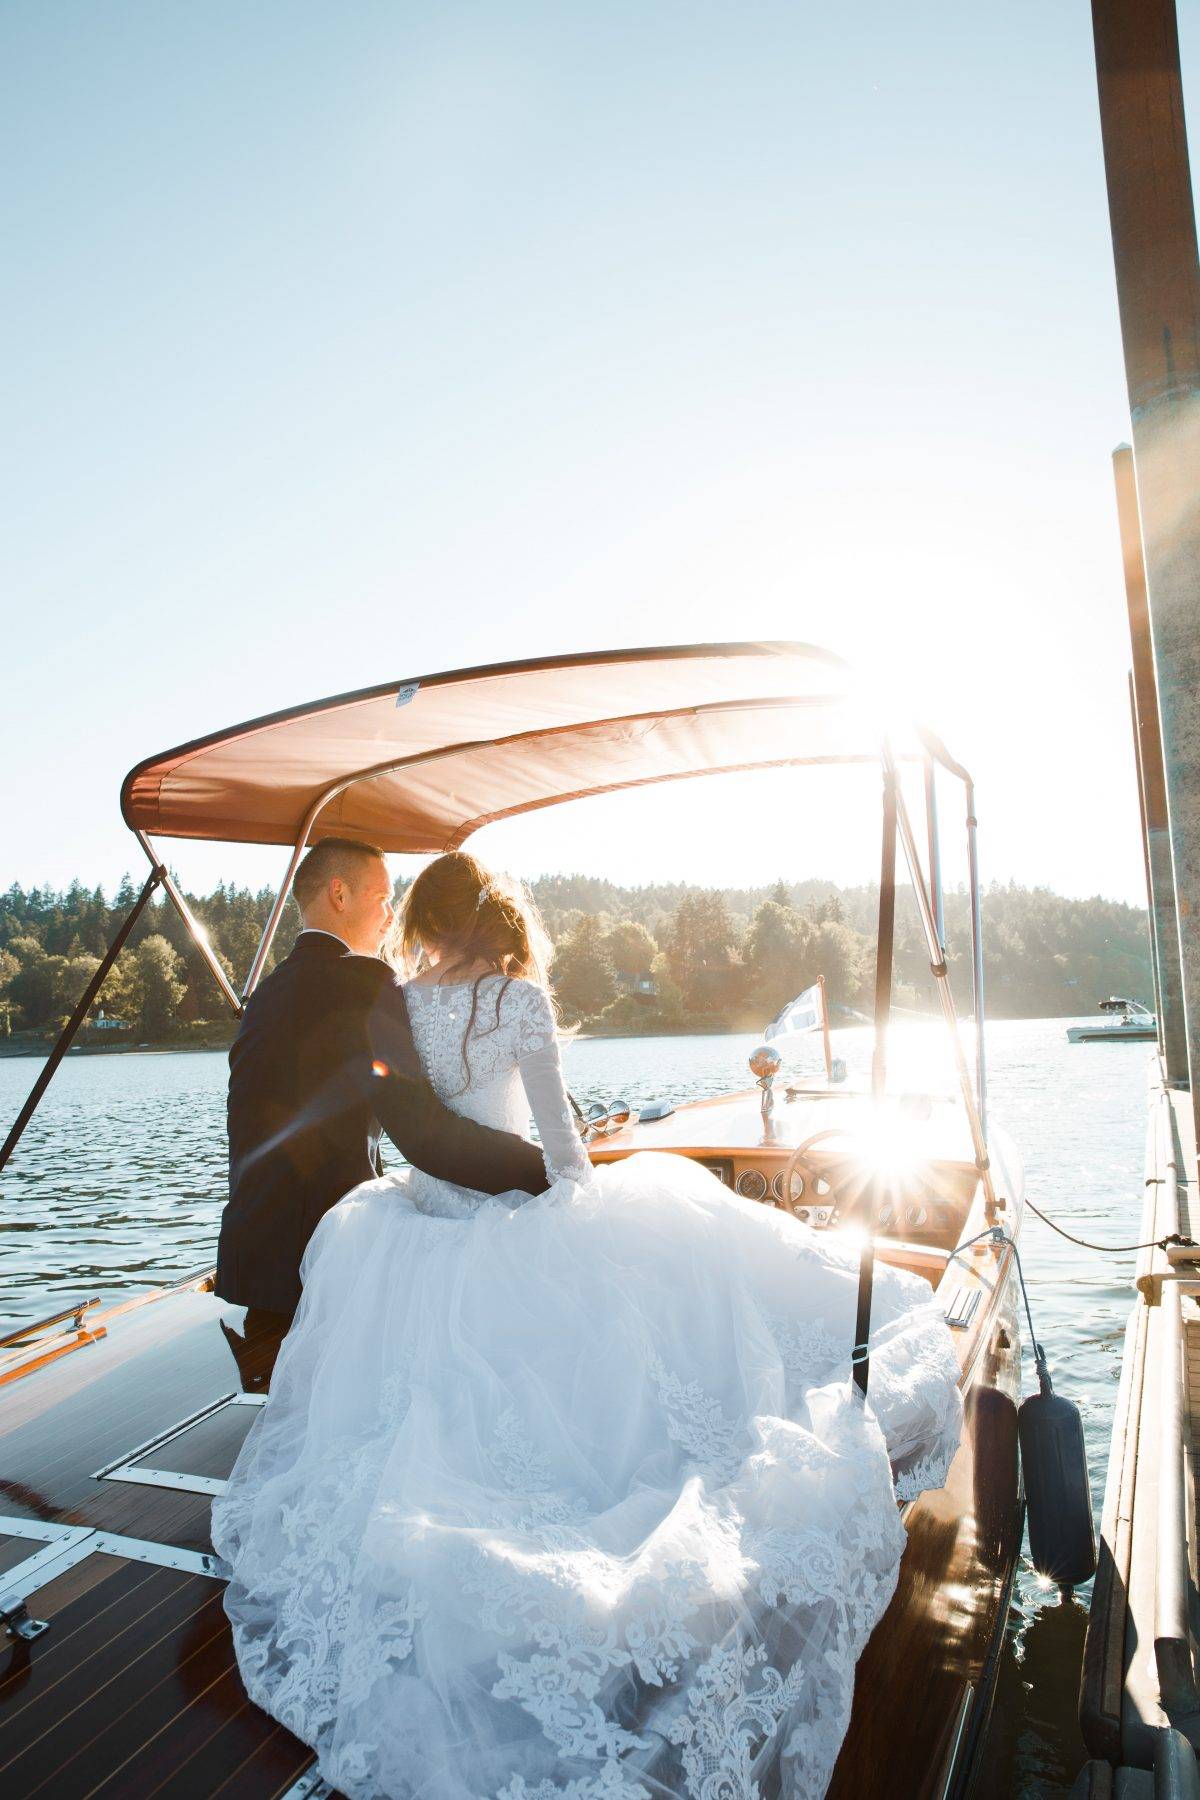 Find the Perfect Transportation for Your Beach Wedding